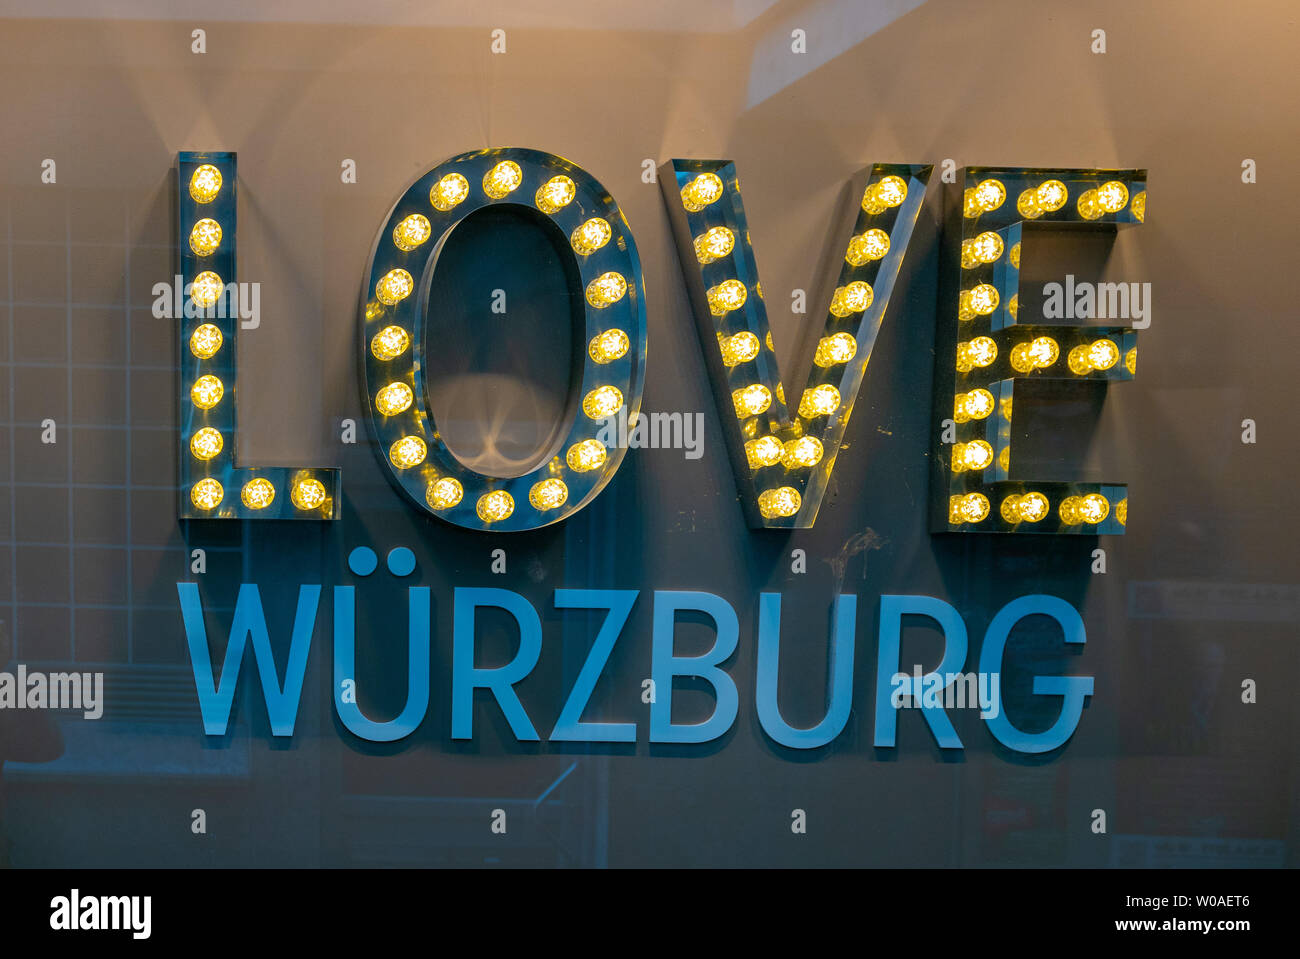 WURZBURG, GERMANY - JUNE 12, 2019: advertising slogan in a showcase of the city Stock Photo